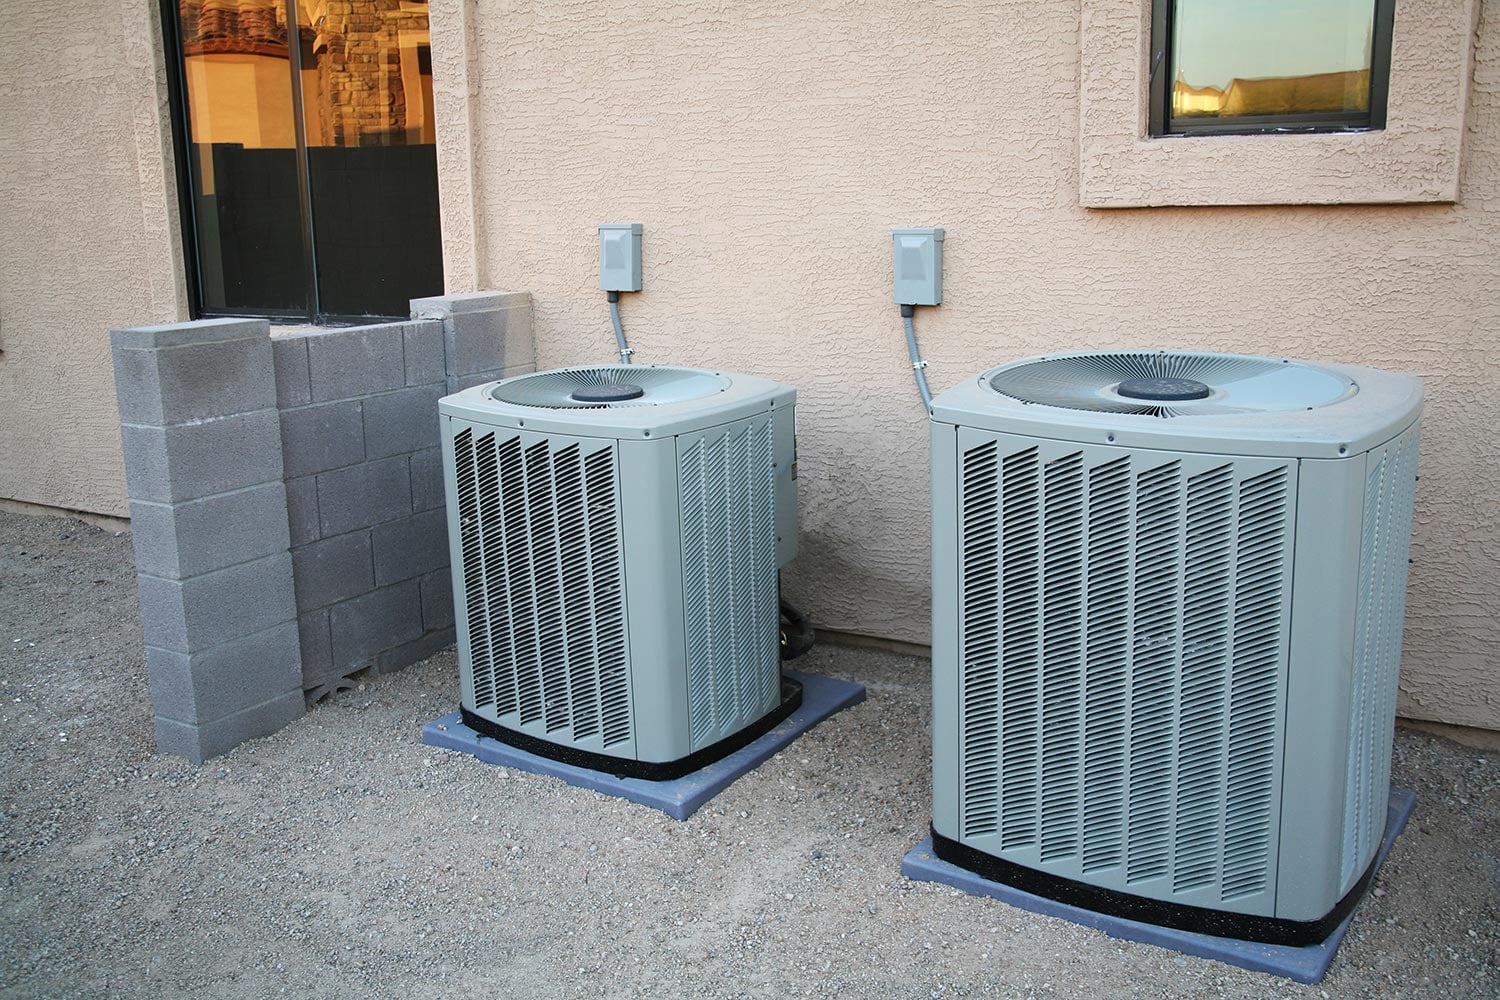 A couple of brand new air conditioners sitting next to a new home